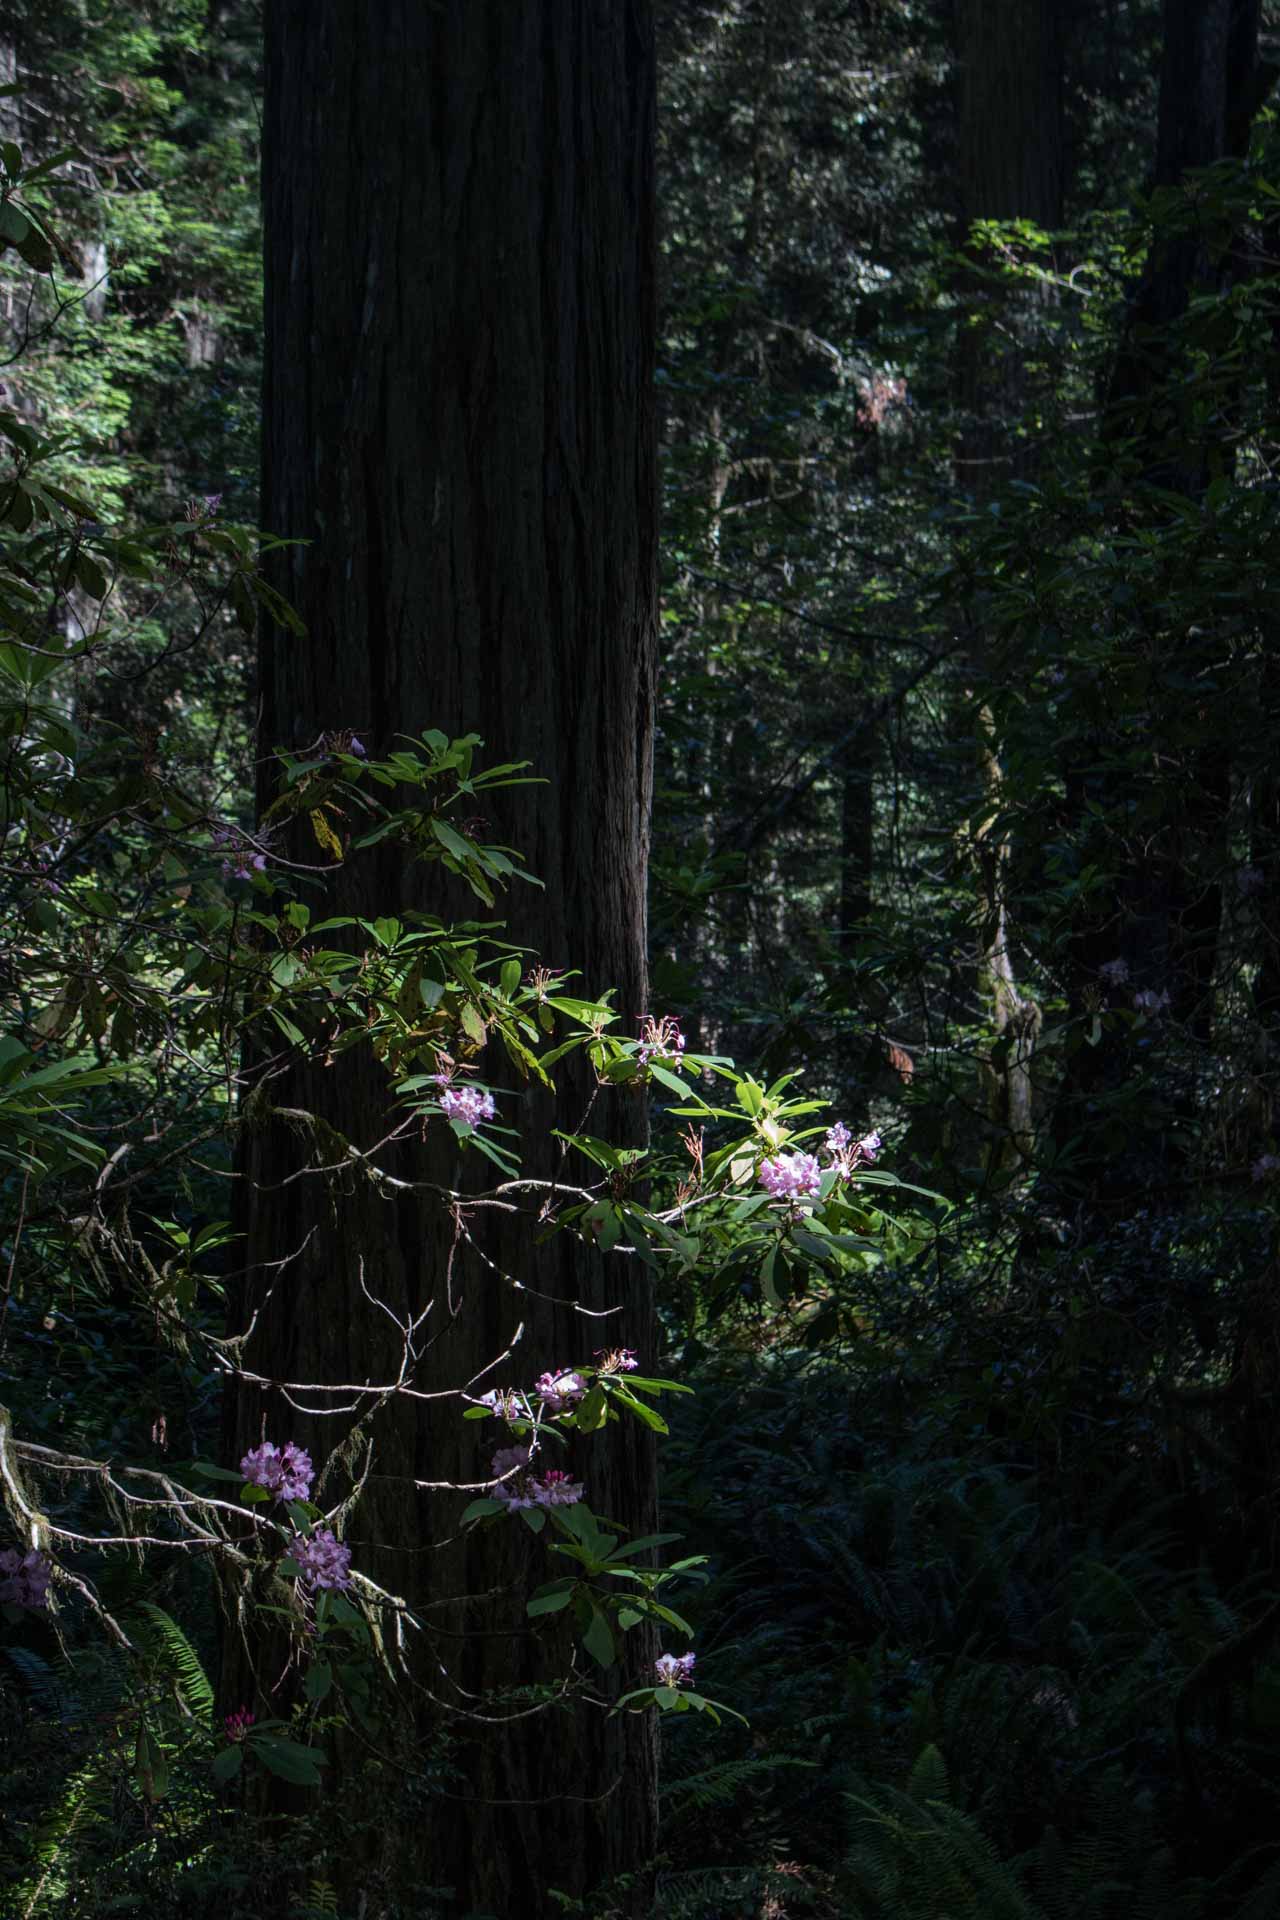 Rhododendron in Bloom, Lady Bird Johnson Grove Trail, Redwood National Park, California